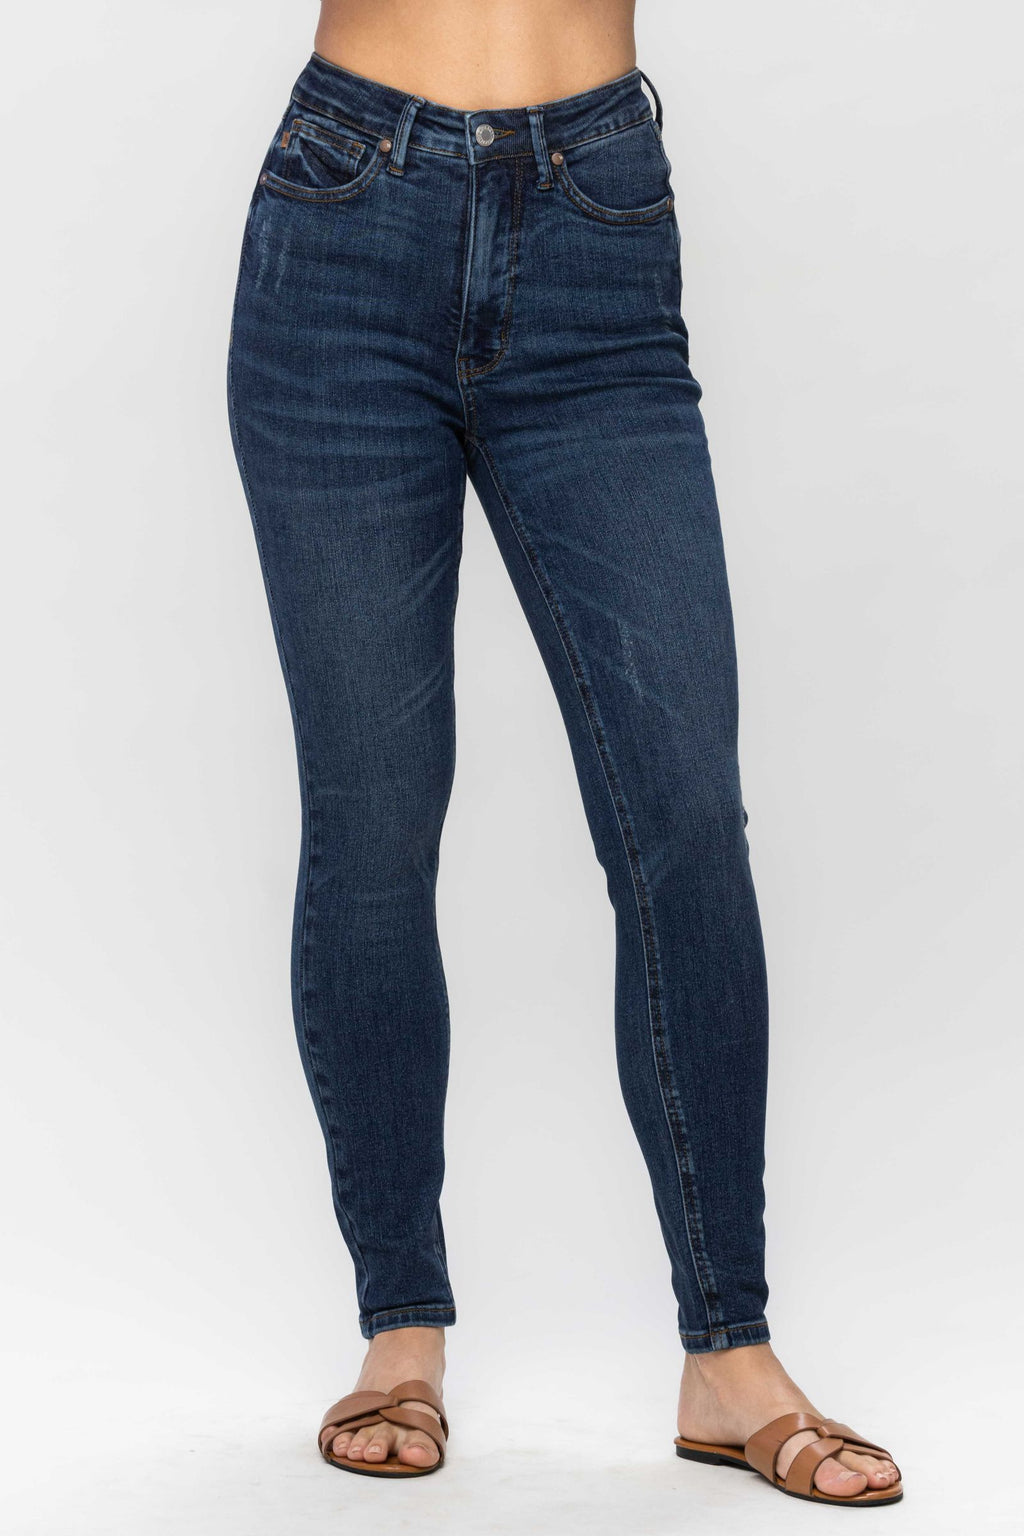 Judy Blue Jeans  Catonsville Mid Rise Skinny Jeggings Black